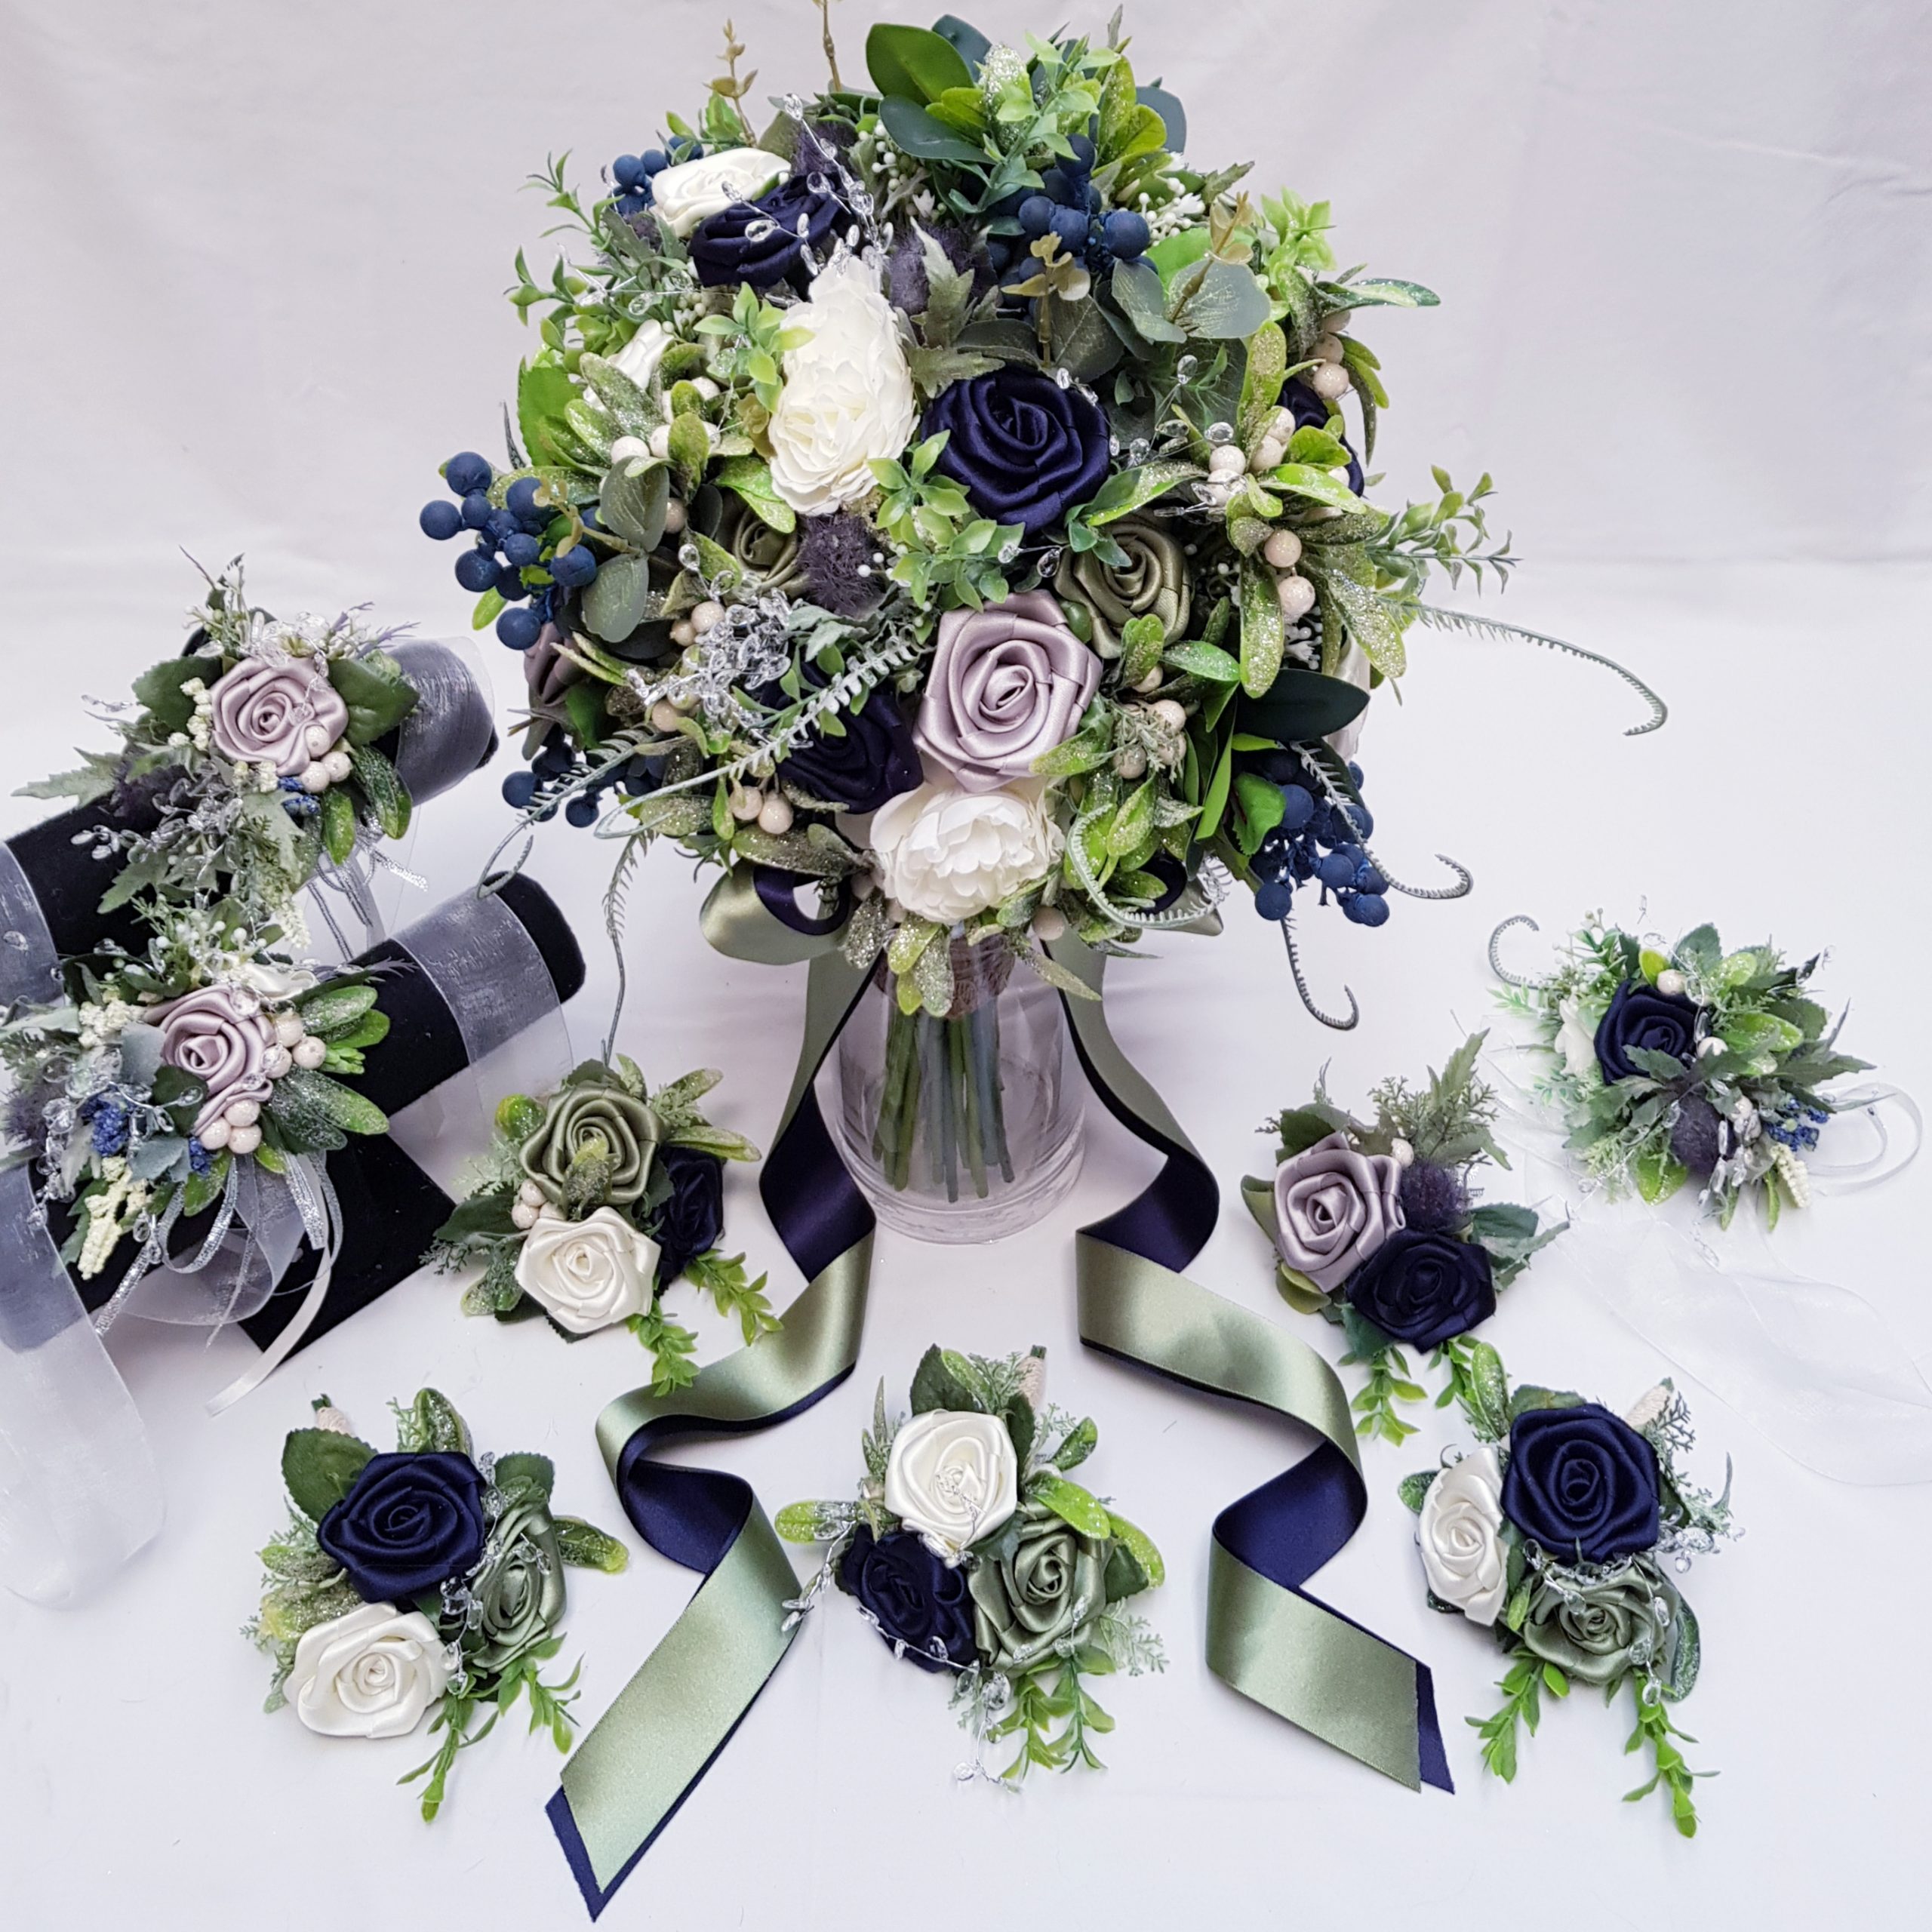 At Jane's Bespoke Flowers in Catterick Garrison listed on Tie The Knot Wedding Directory